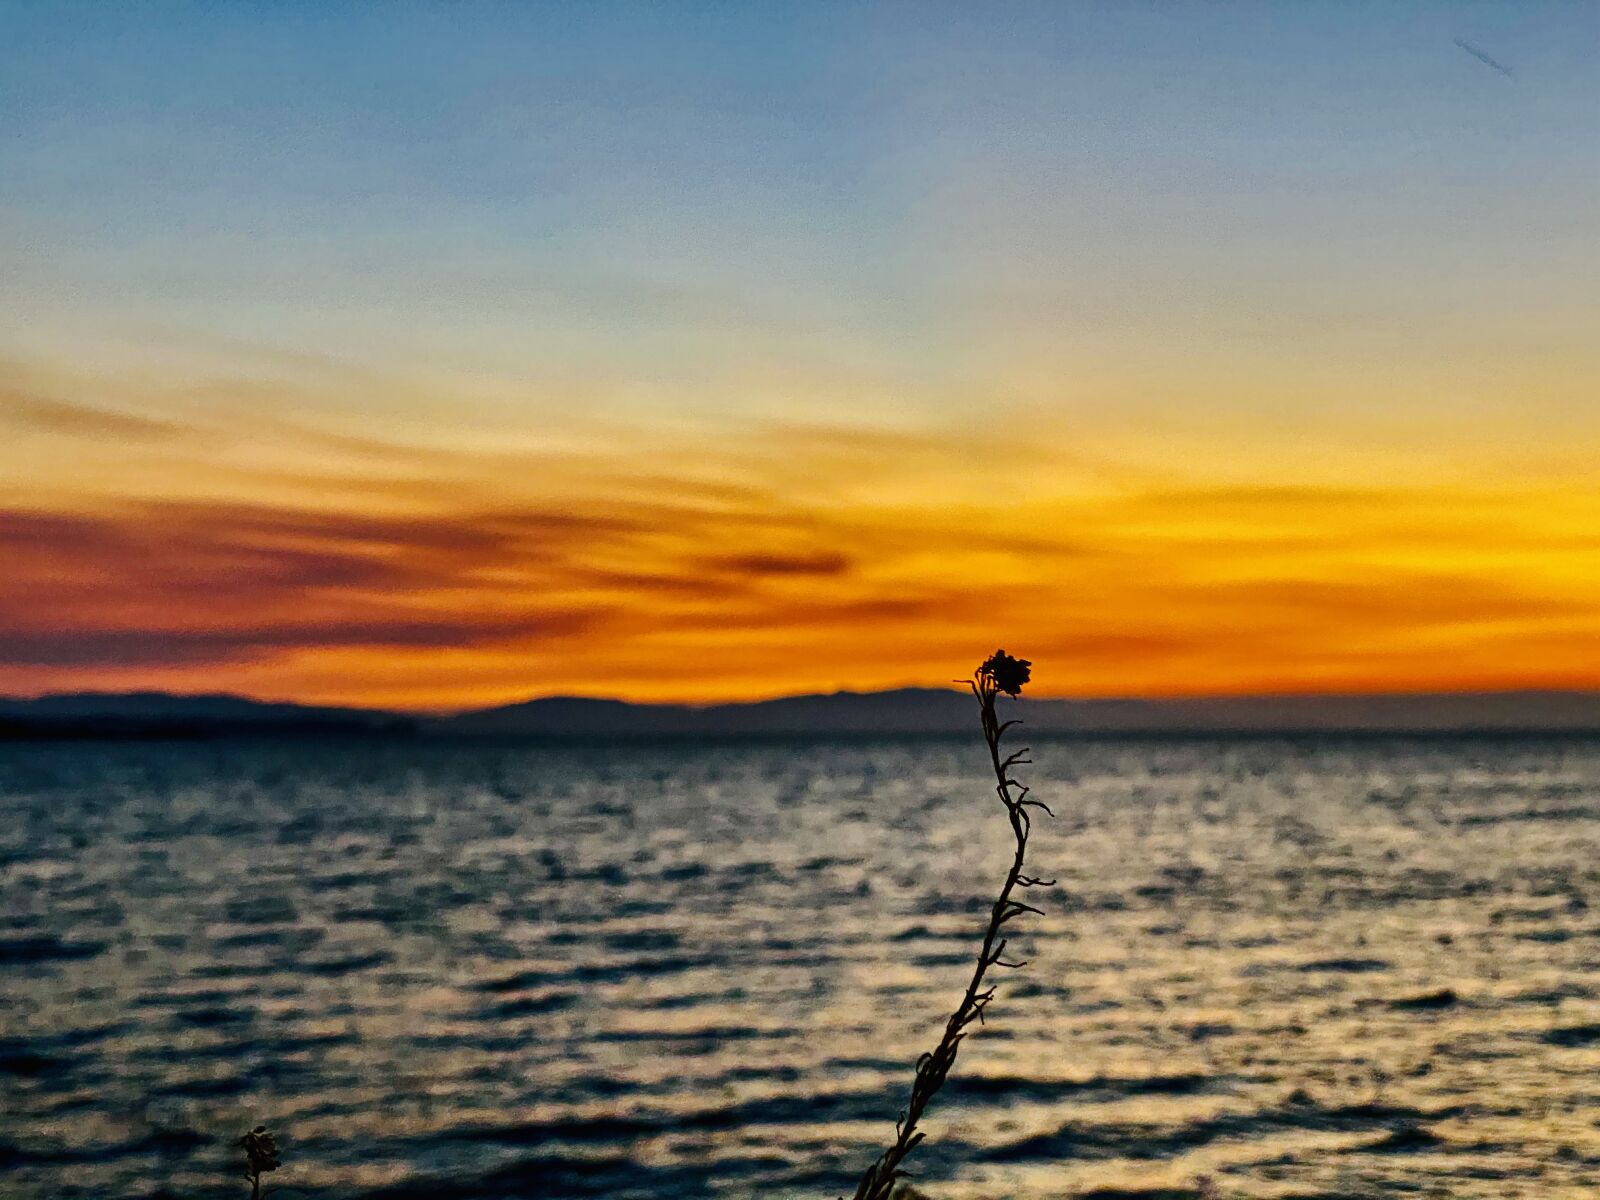 iPhone 11 Pro Max back triple camera 6mm f/2 sample photo. Sunset, go to beach photography